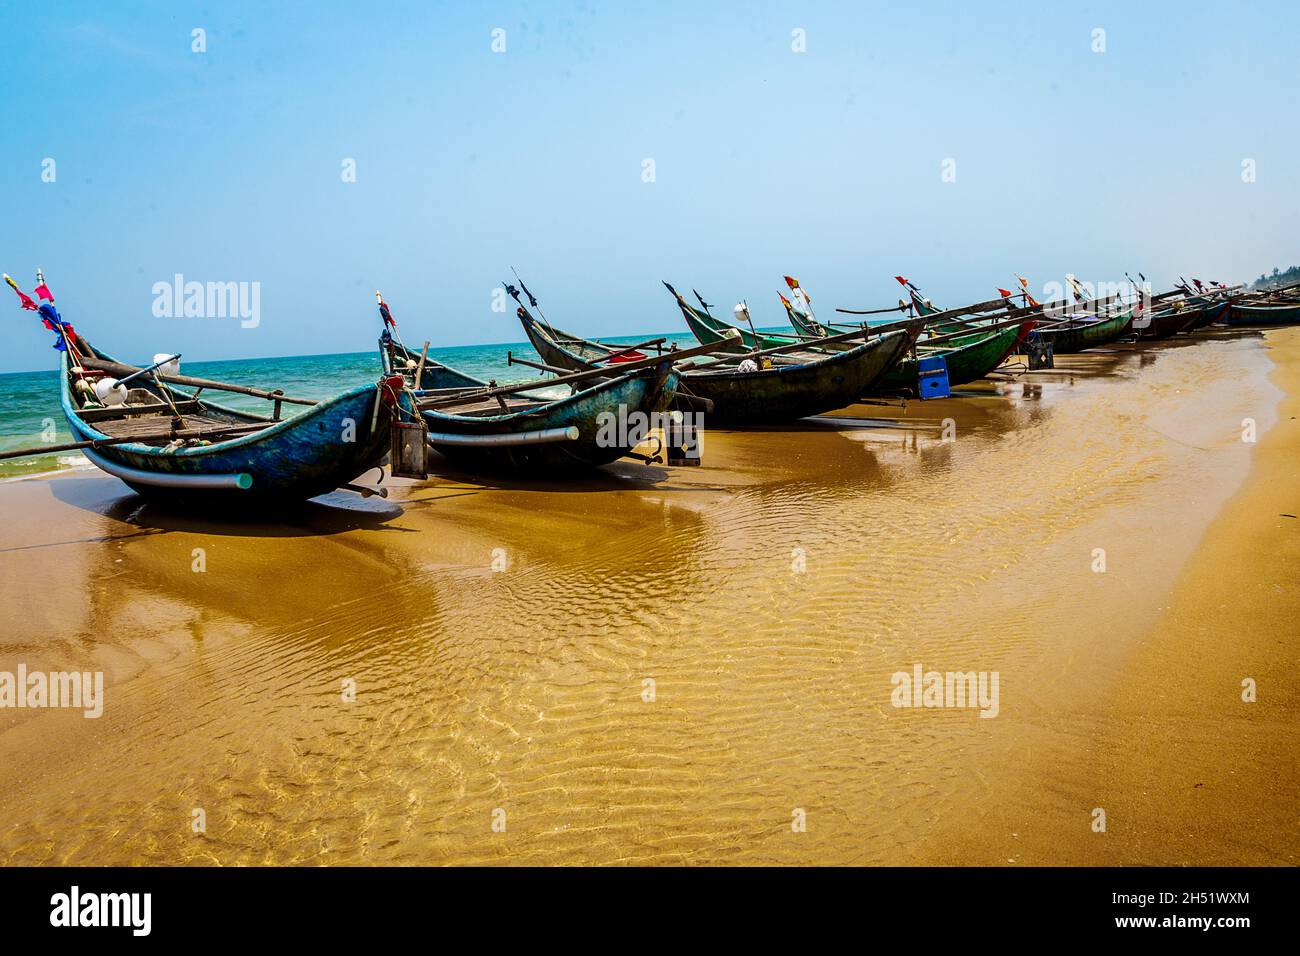 Fishing boats pulled up on the beach at Tam Ky, Tam Thanh. Stock Photo